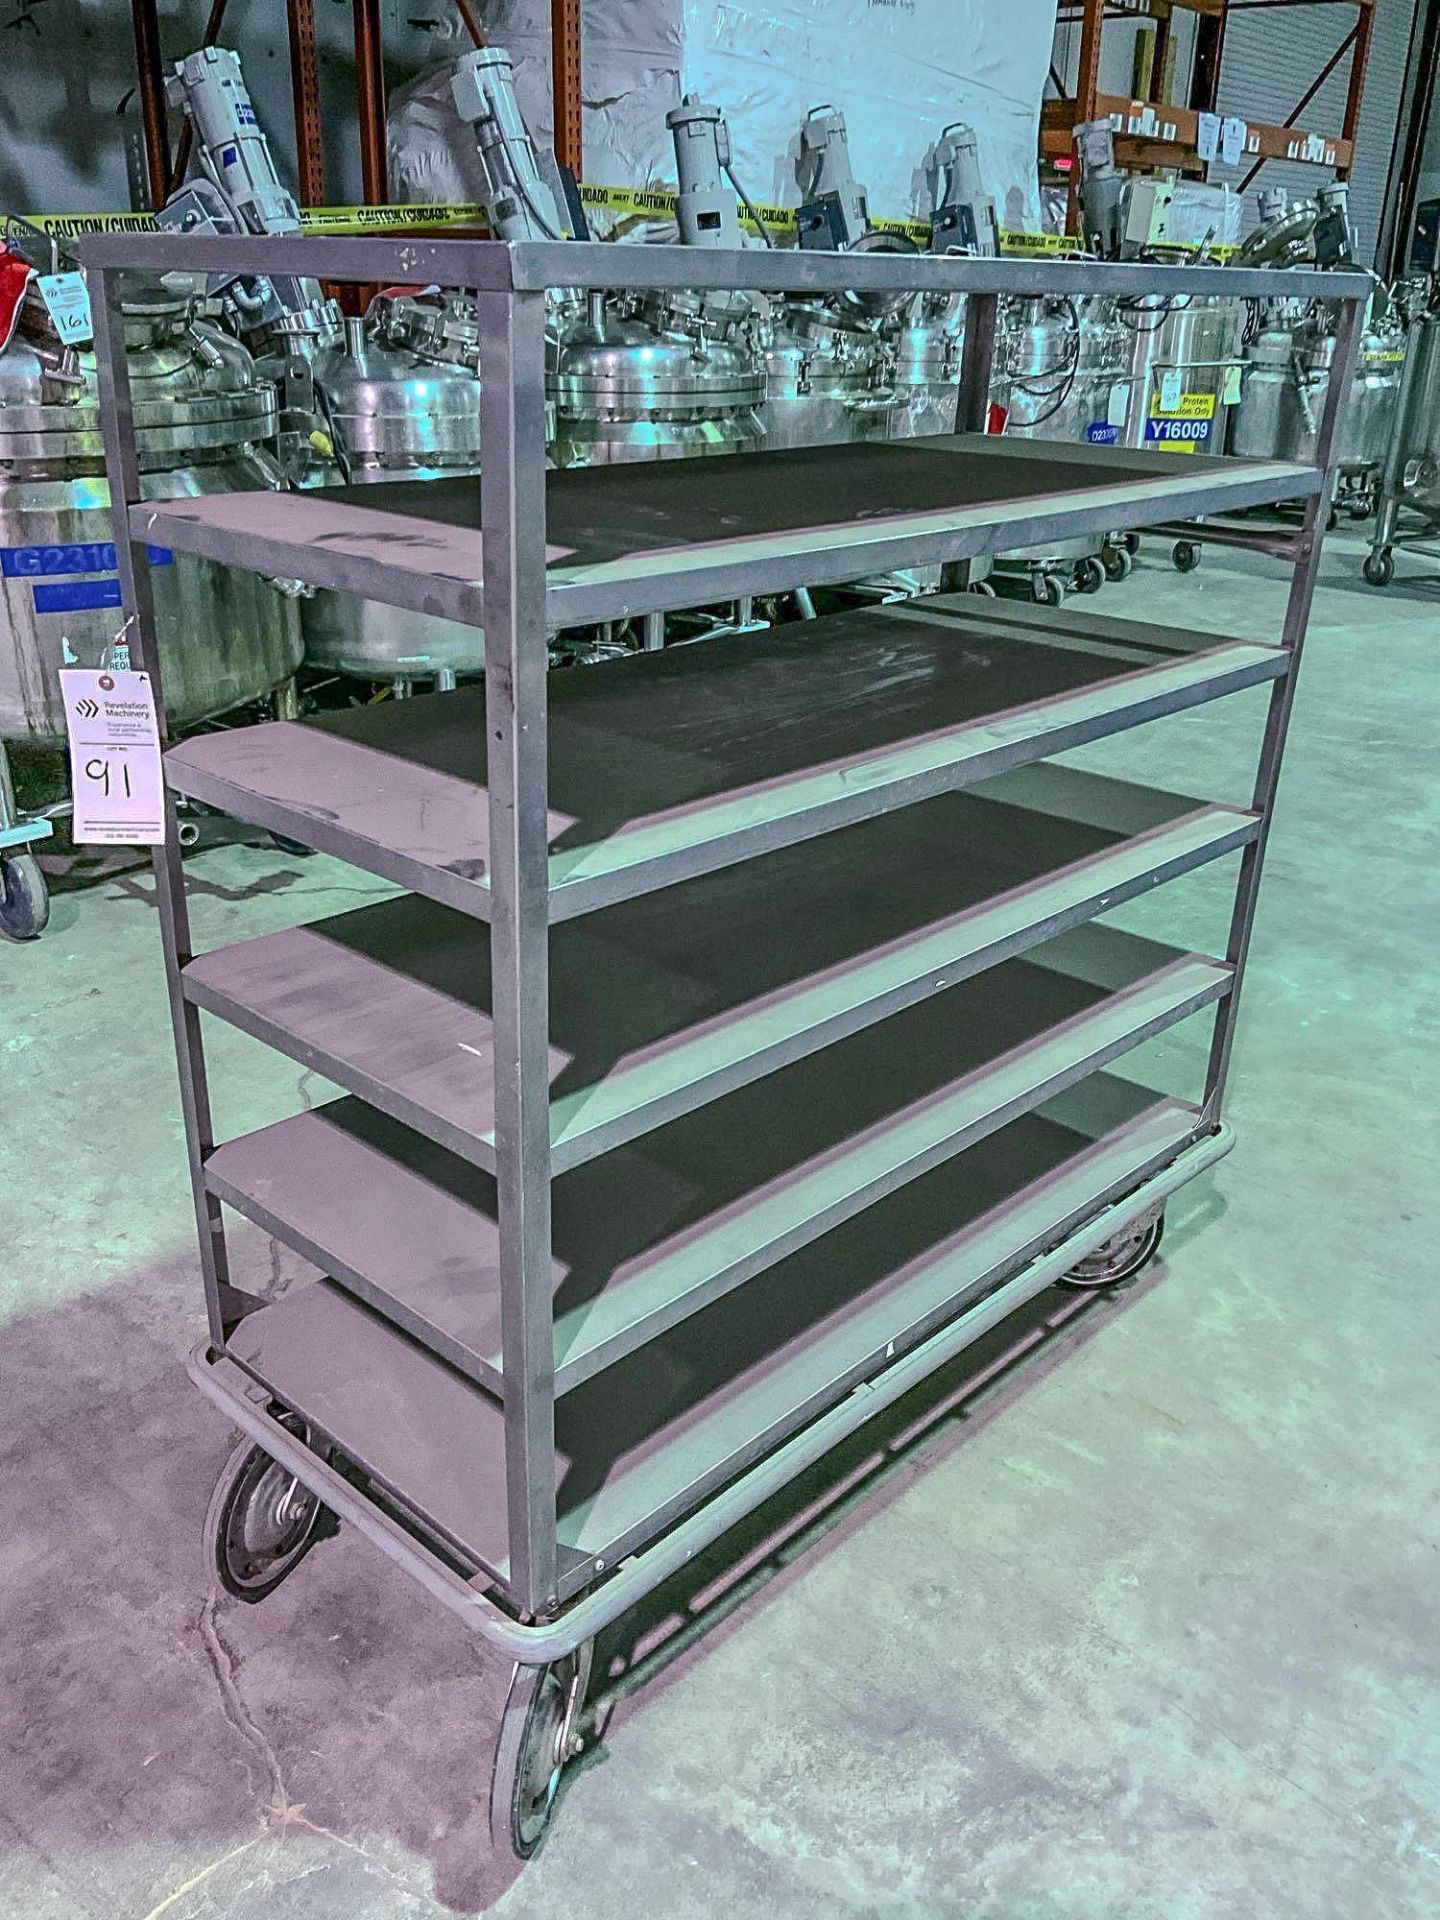 SIX SHELF STAINLESS STEEL ROLLER CART - Image 2 of 6